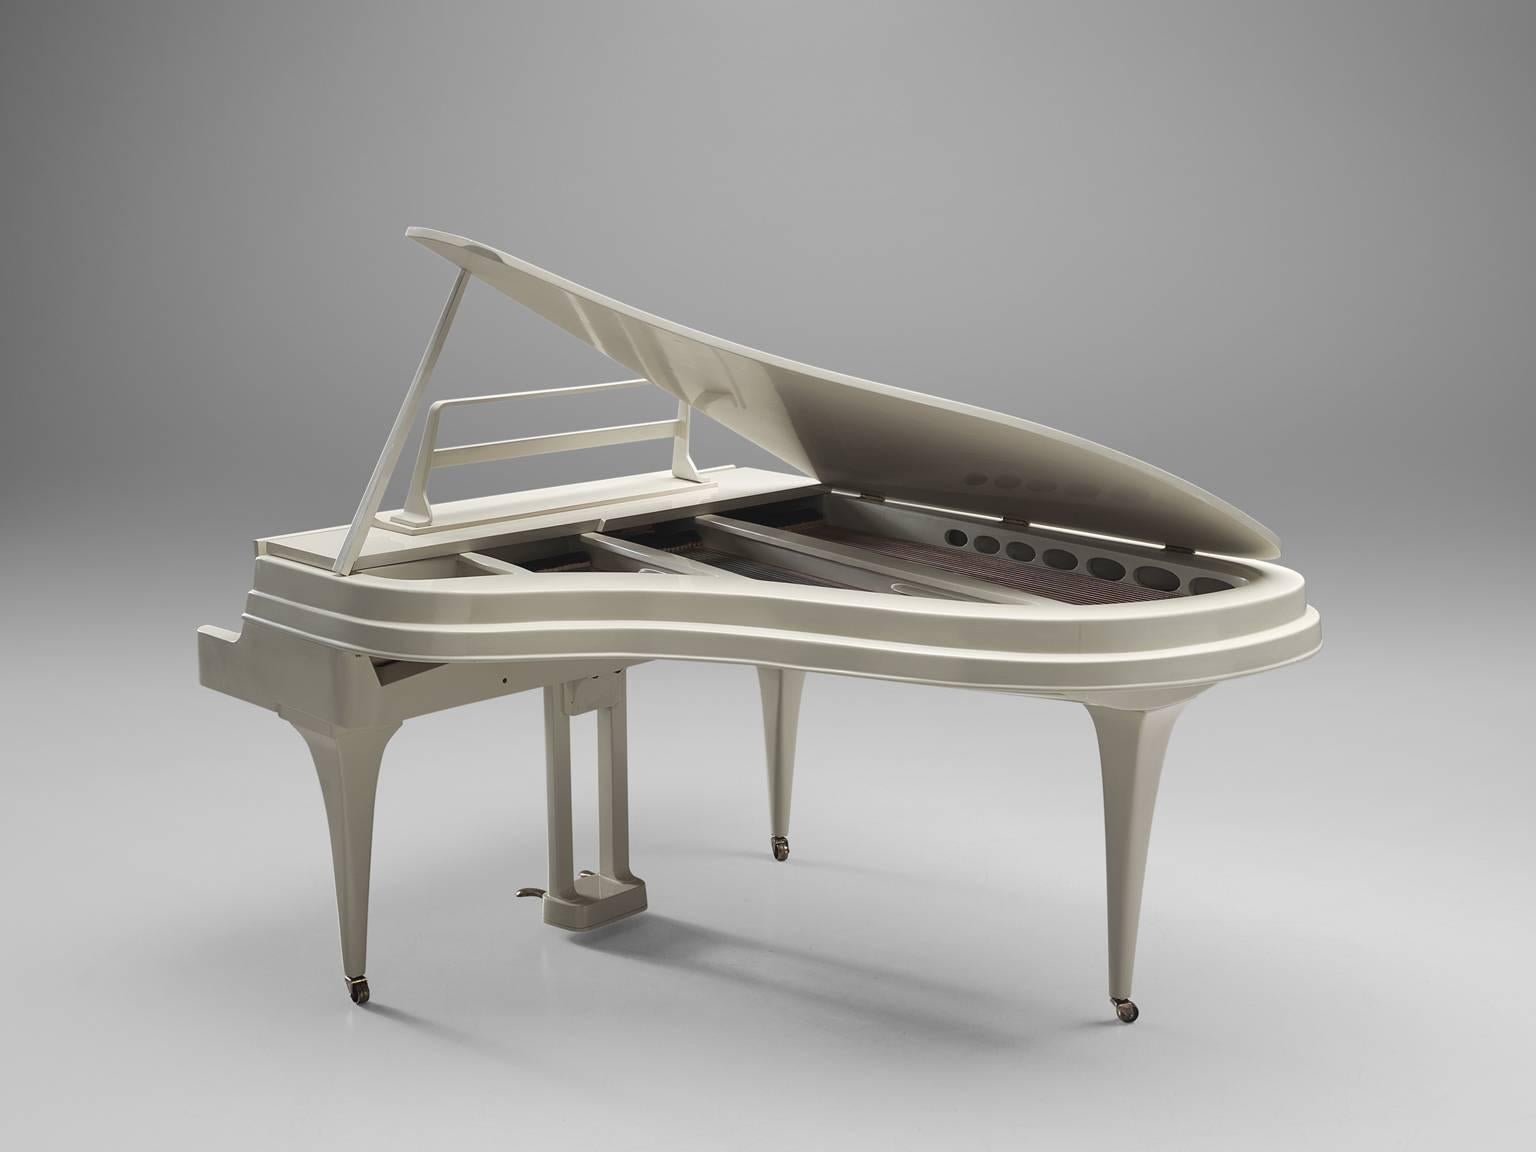 White grand piano, aluminium alloy, wood, brass by Rippen Pianofabriek N.V., The Netherlands, 1946 (production 1950s). 

This model is a renown grand piano by the Dutch piano maker Rippen from Ede. The model was a revolution when it was designed in